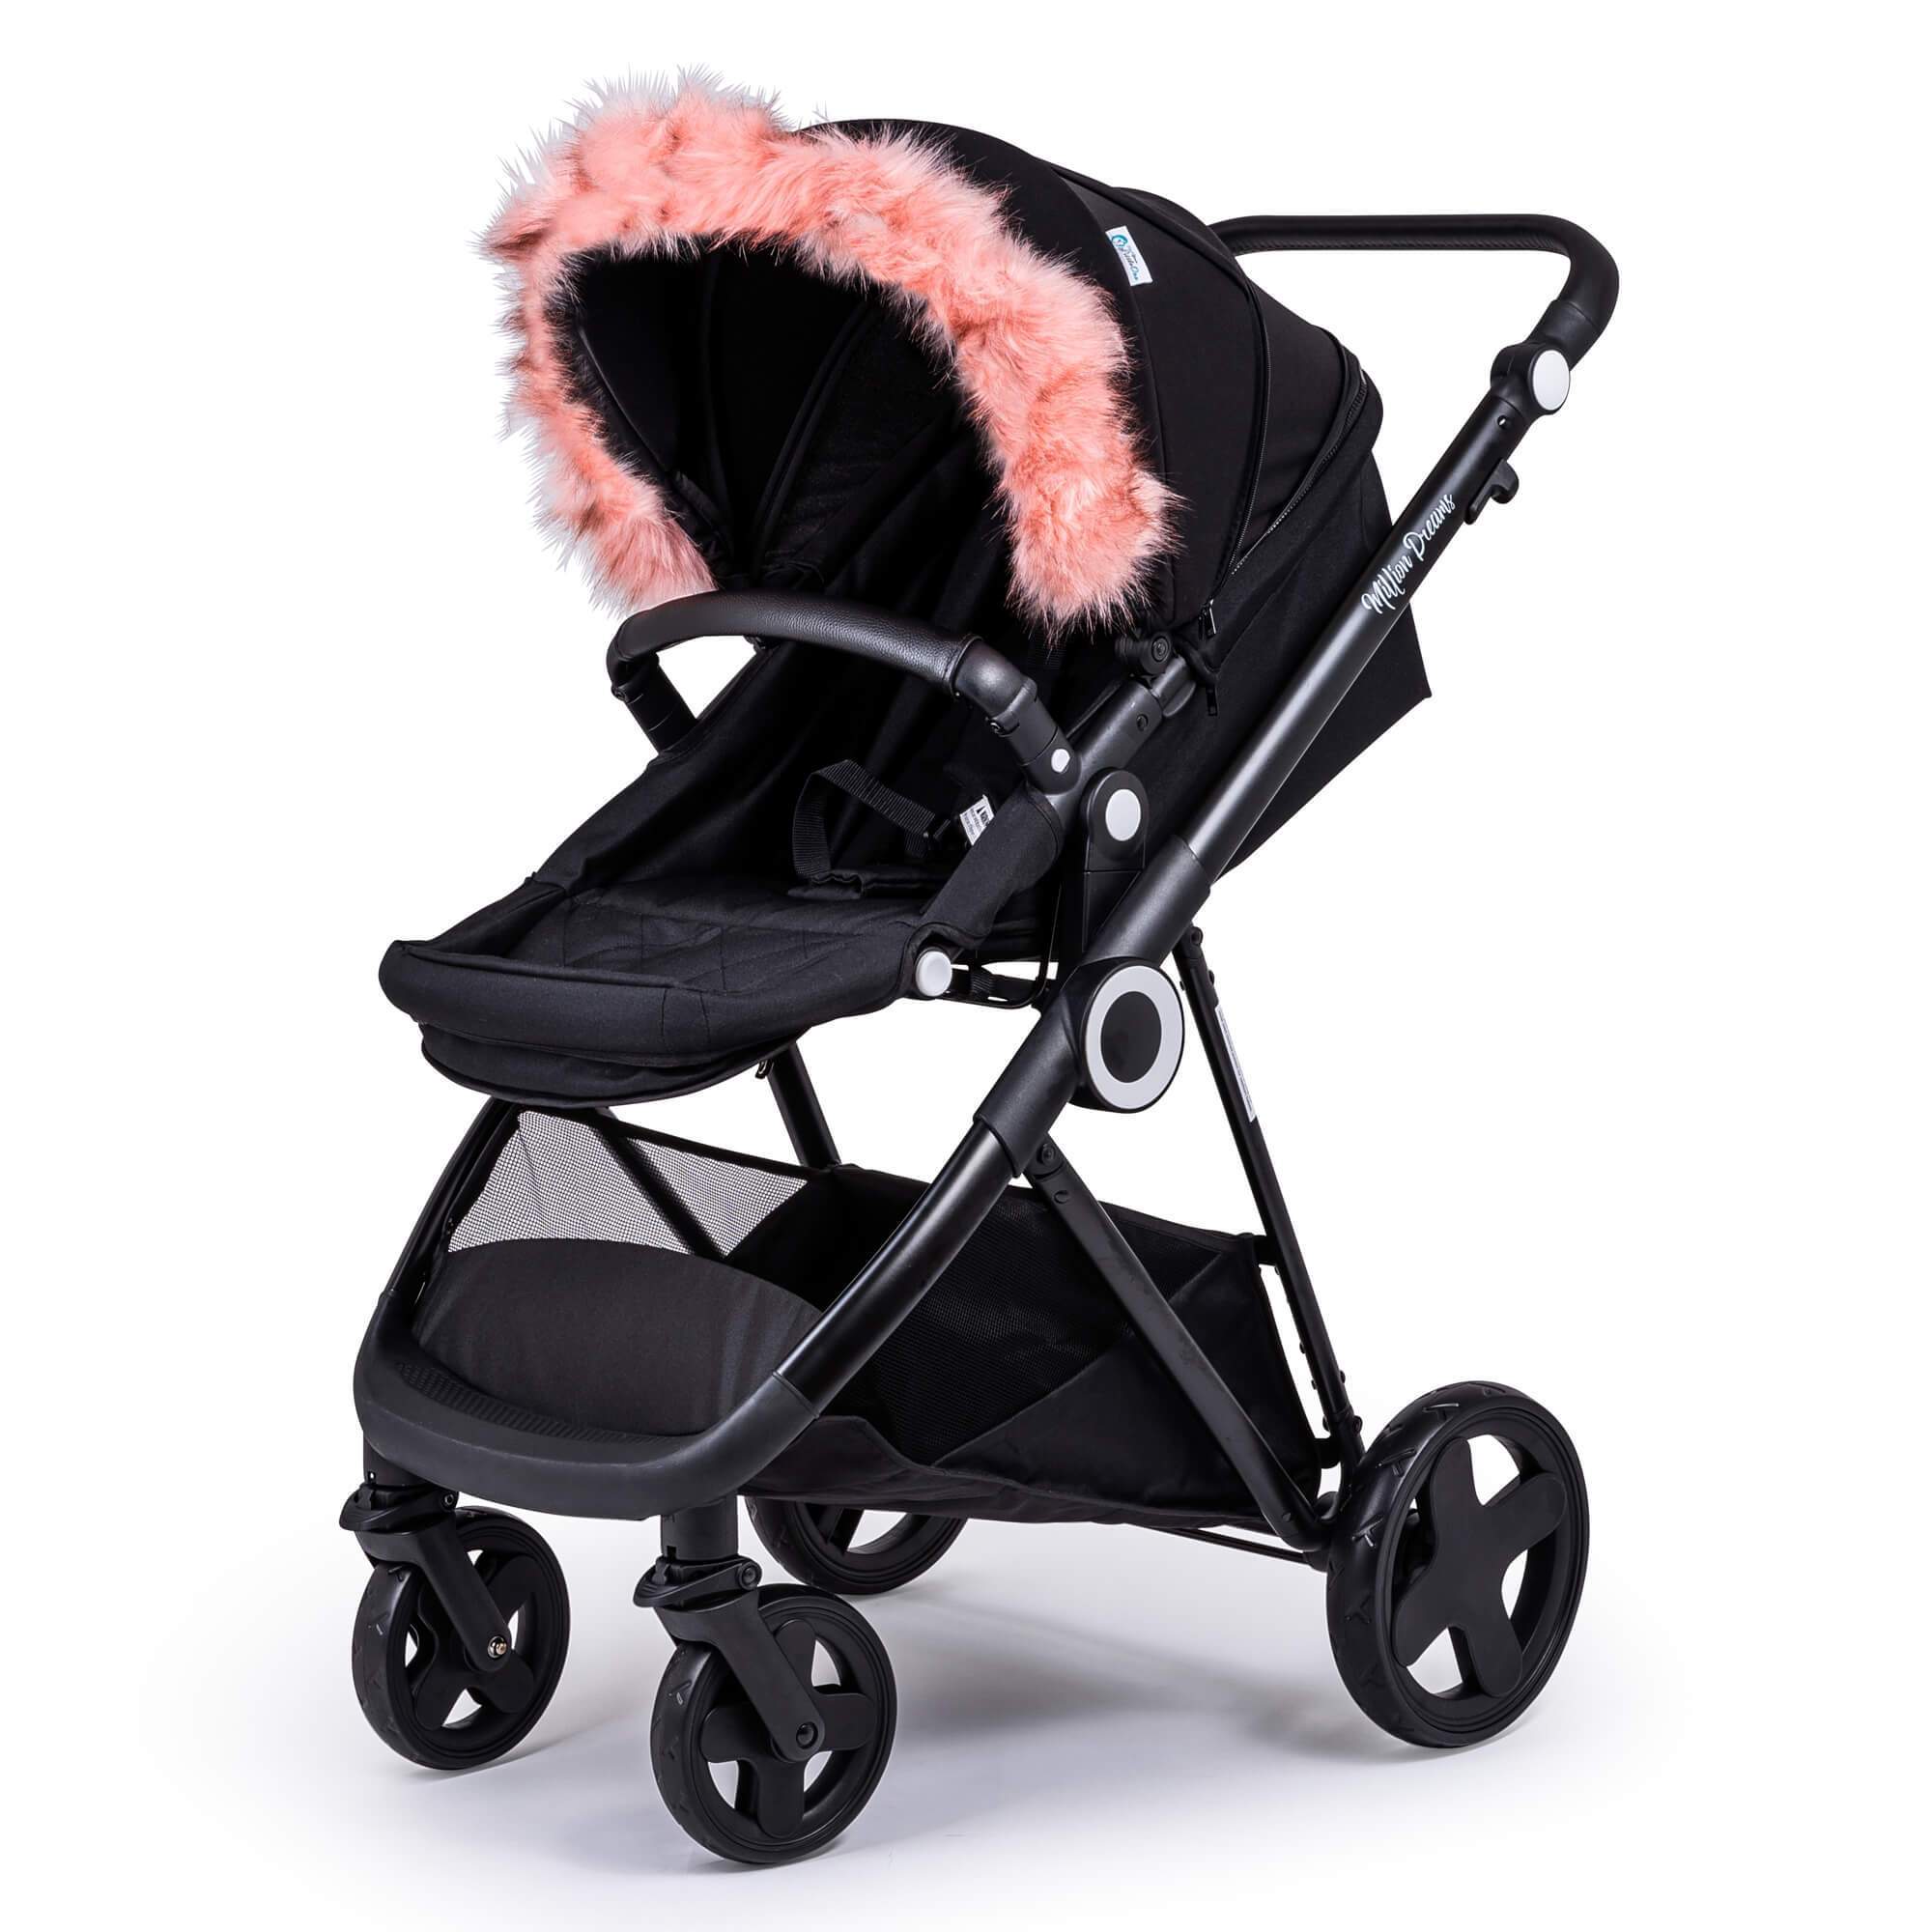 Pram Fur Hood Trim Attachment for Pushchair Compatible with Kiddicare - Pink / Fits All Models | For Your Little One